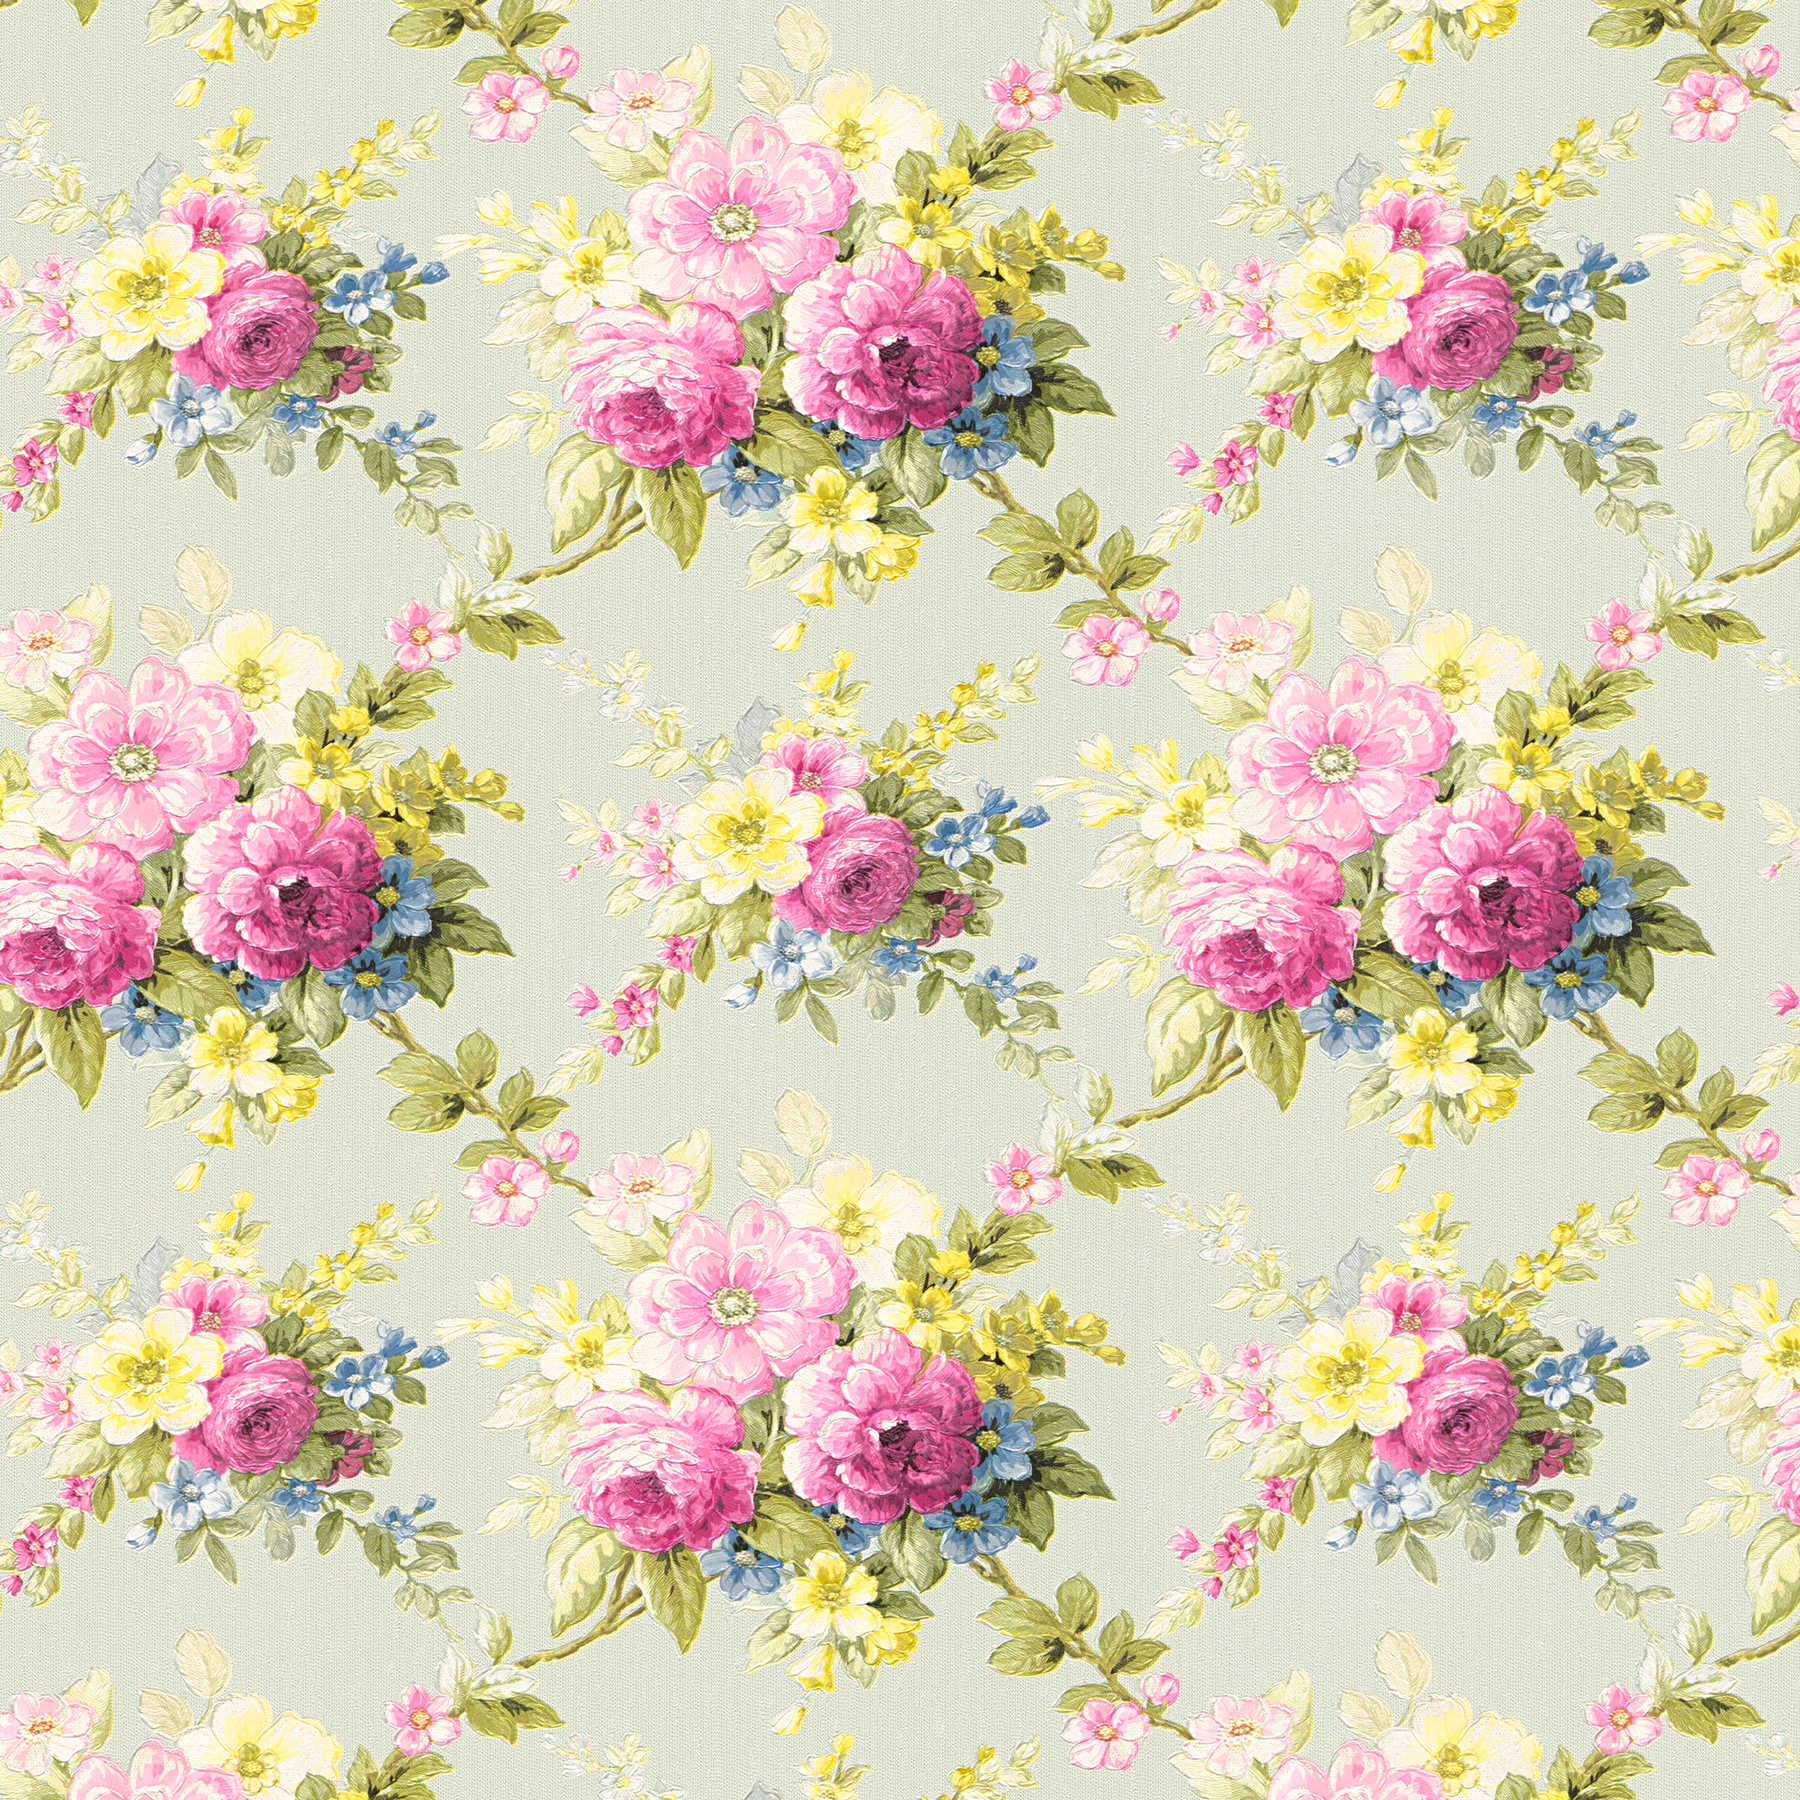 Flowers wallpaper peonies in vintage style - colourful, green
